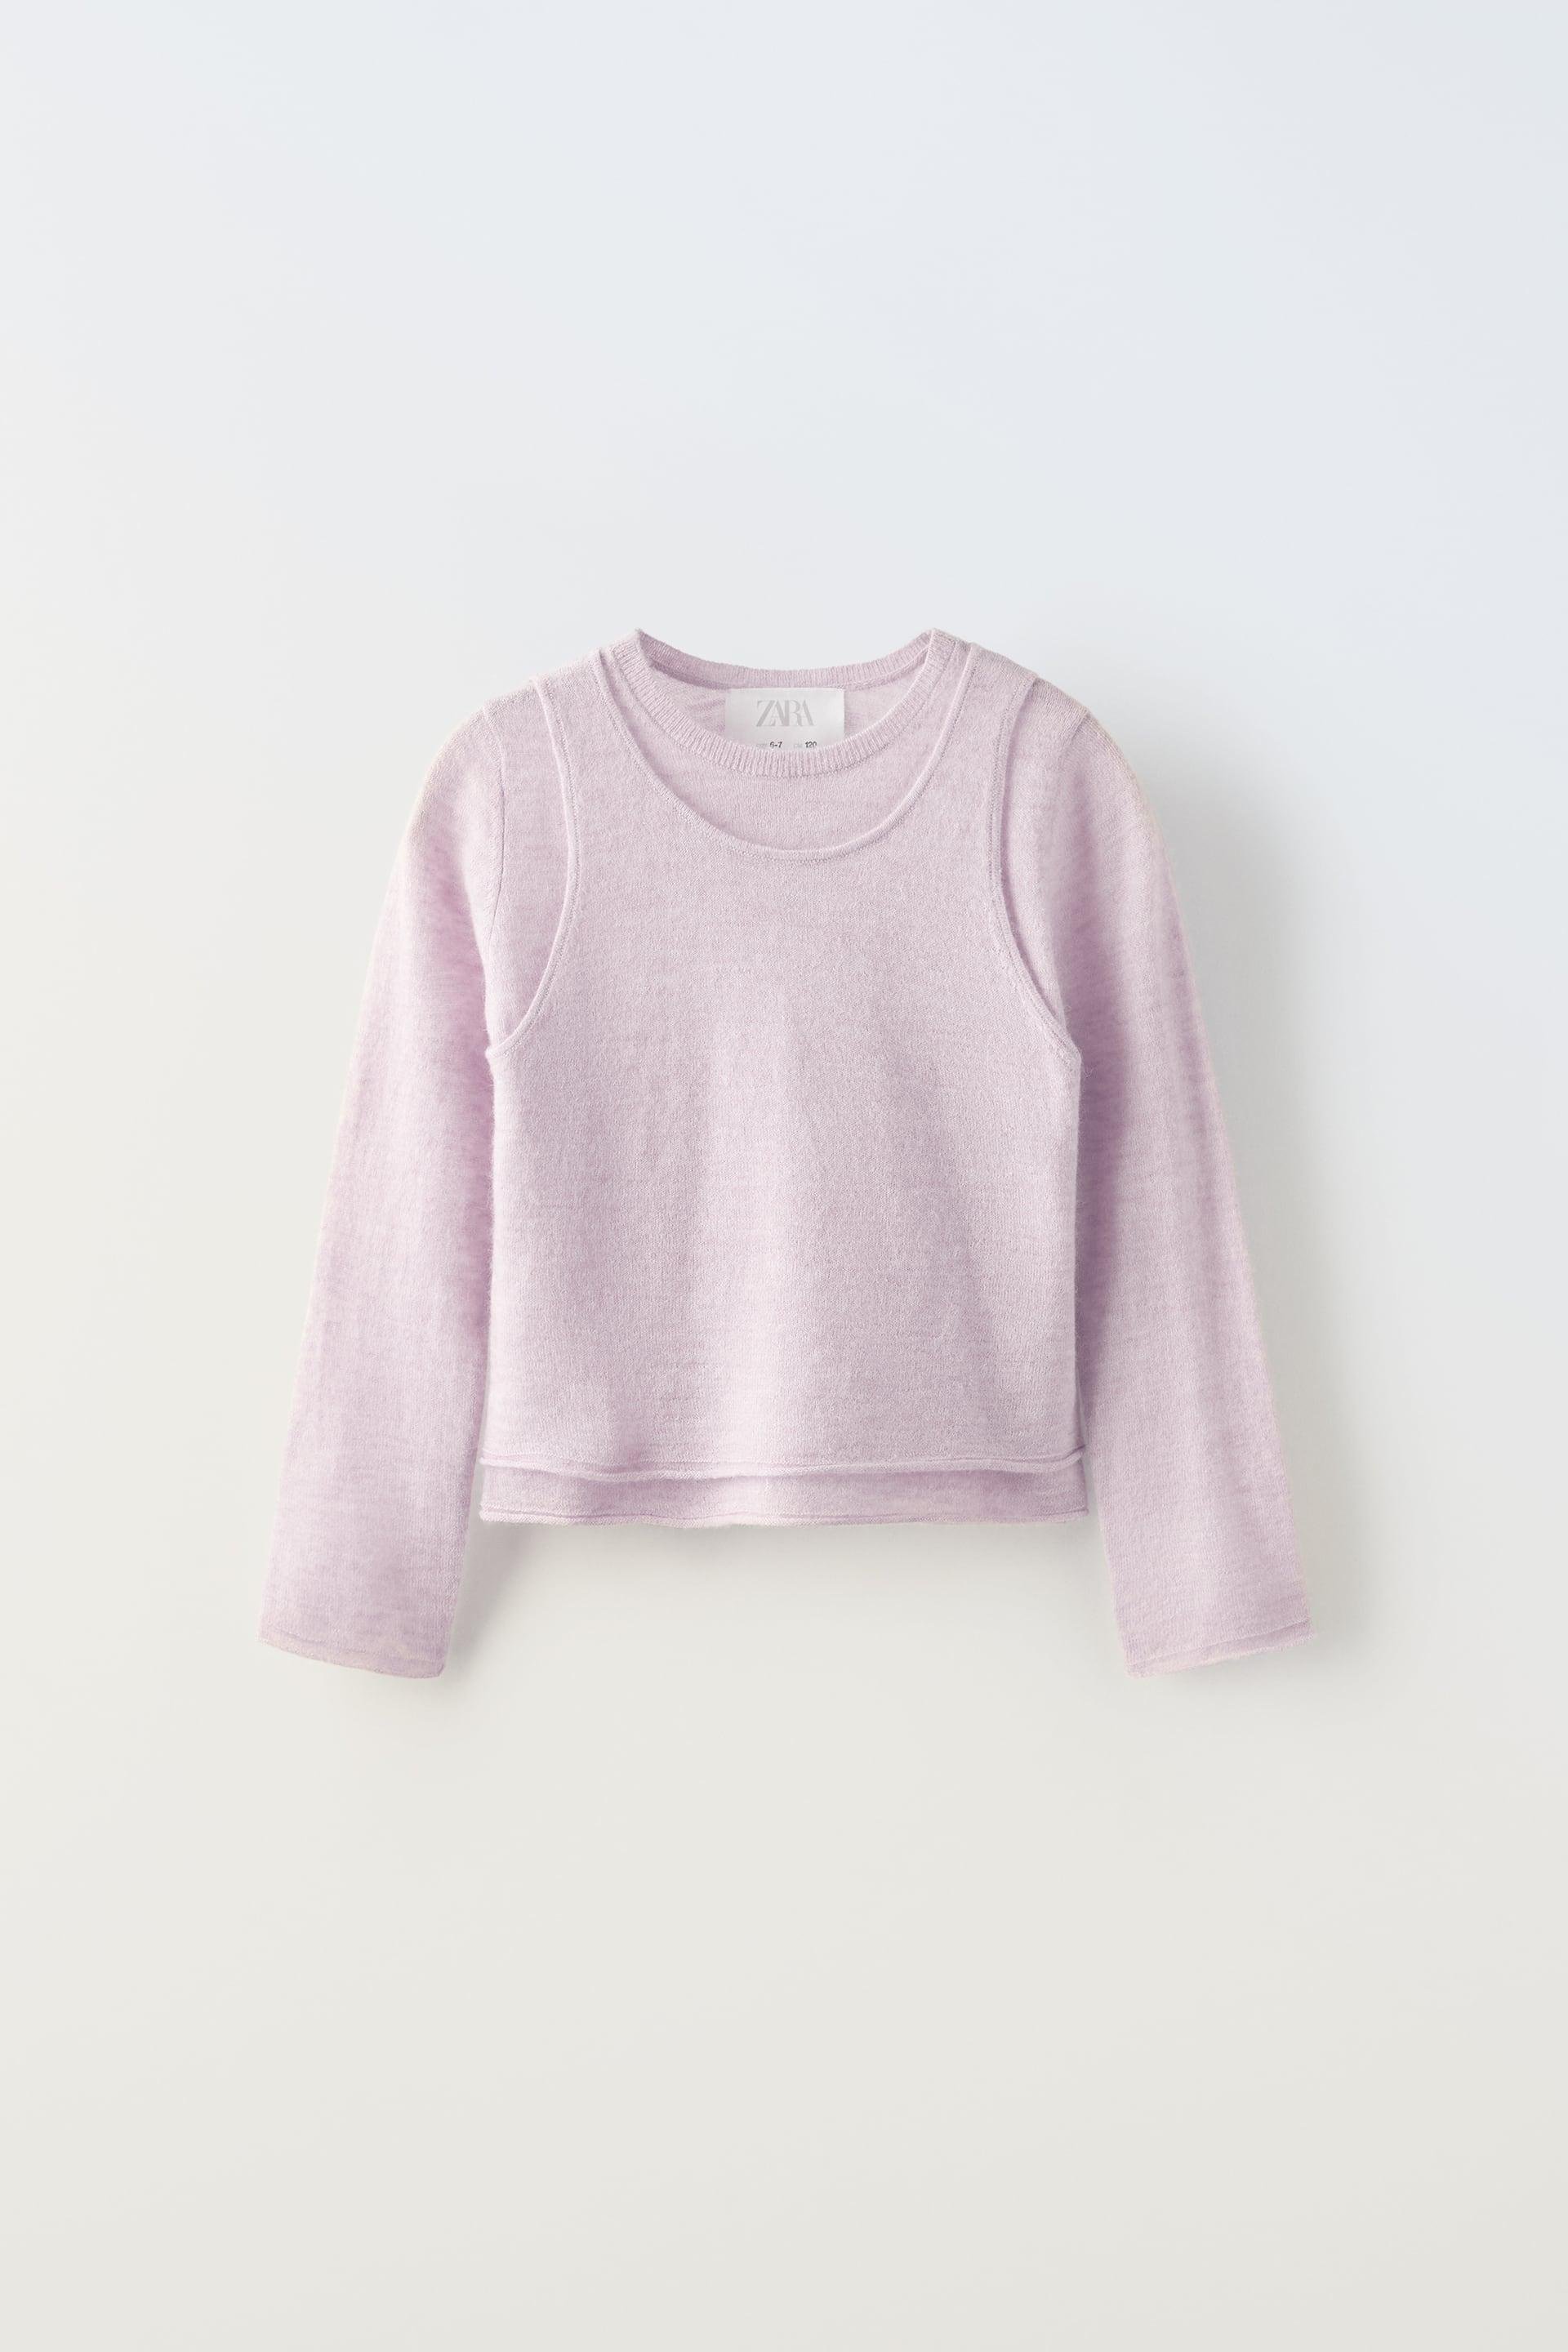 OVERLAY DETAIL SWEATER LIMITED EDITION by ZARA